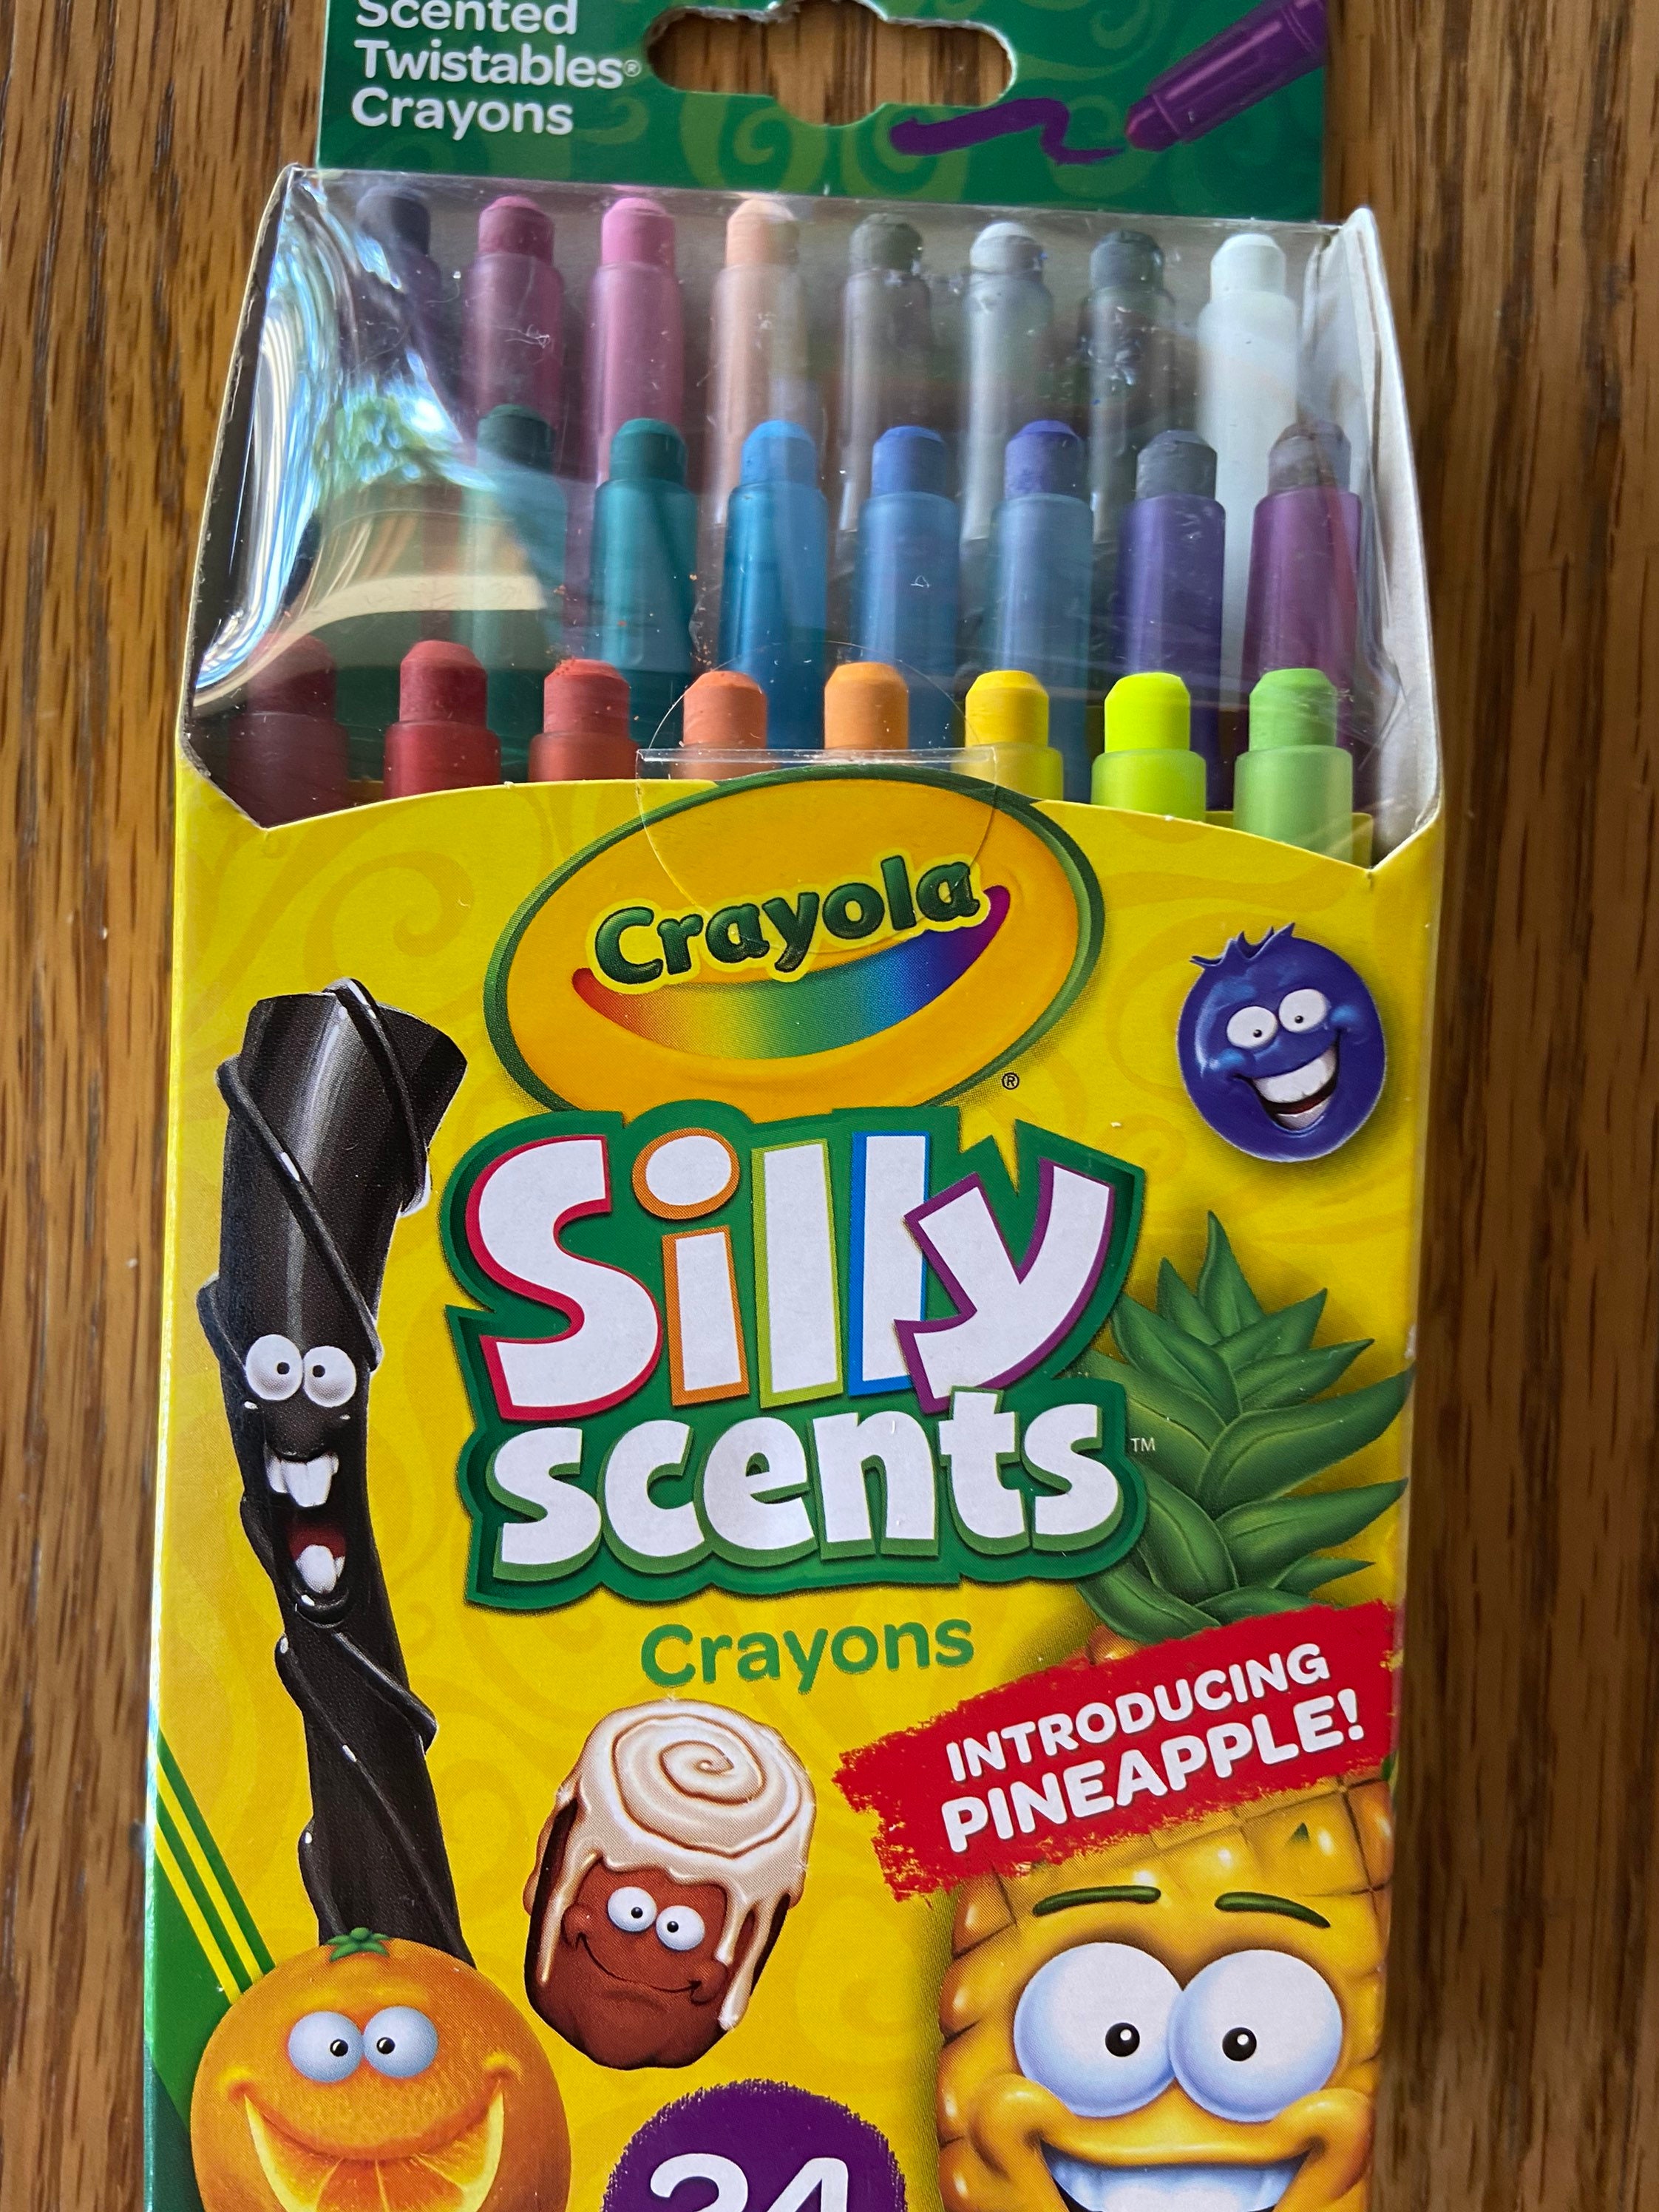 Crayola Silly Scents Twistables Crayons, Sweet Algeria